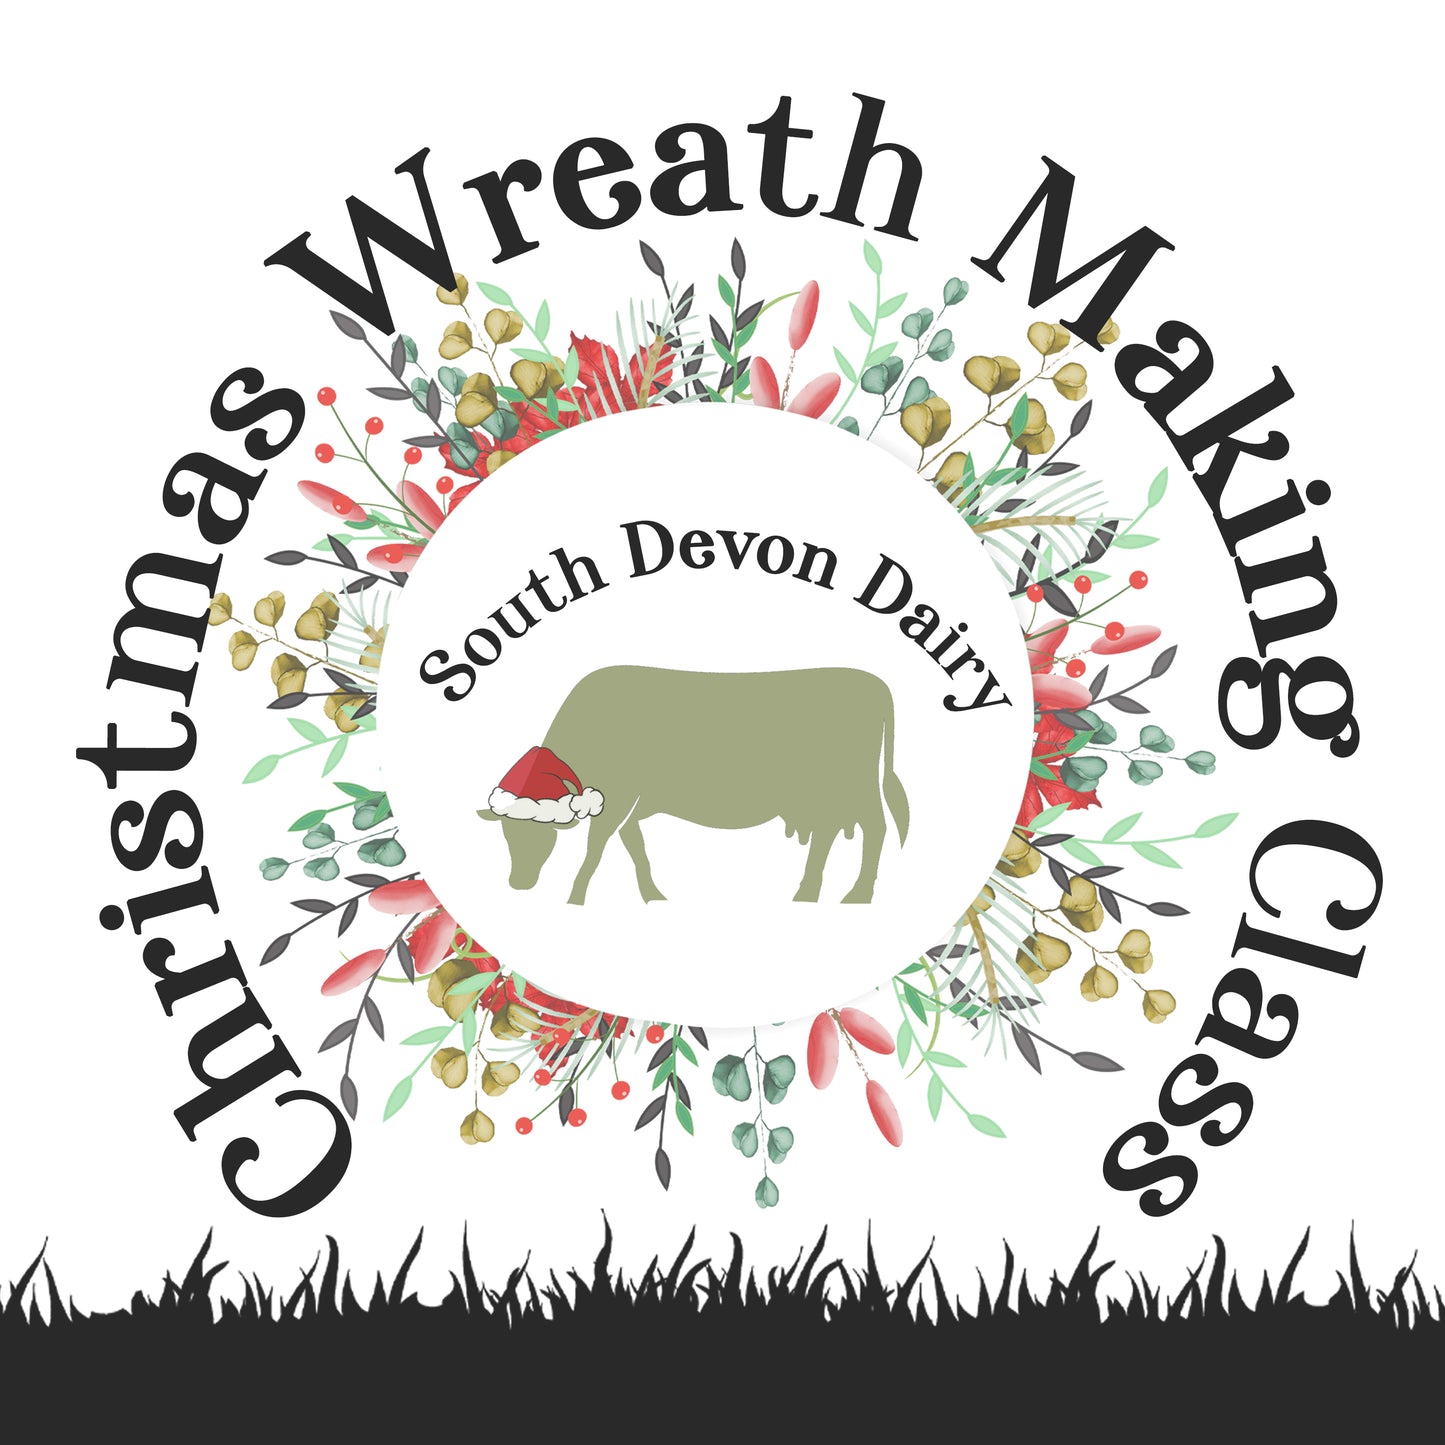 Christmas Wreath Making Class – Friday 8th December 7pm-9pm.